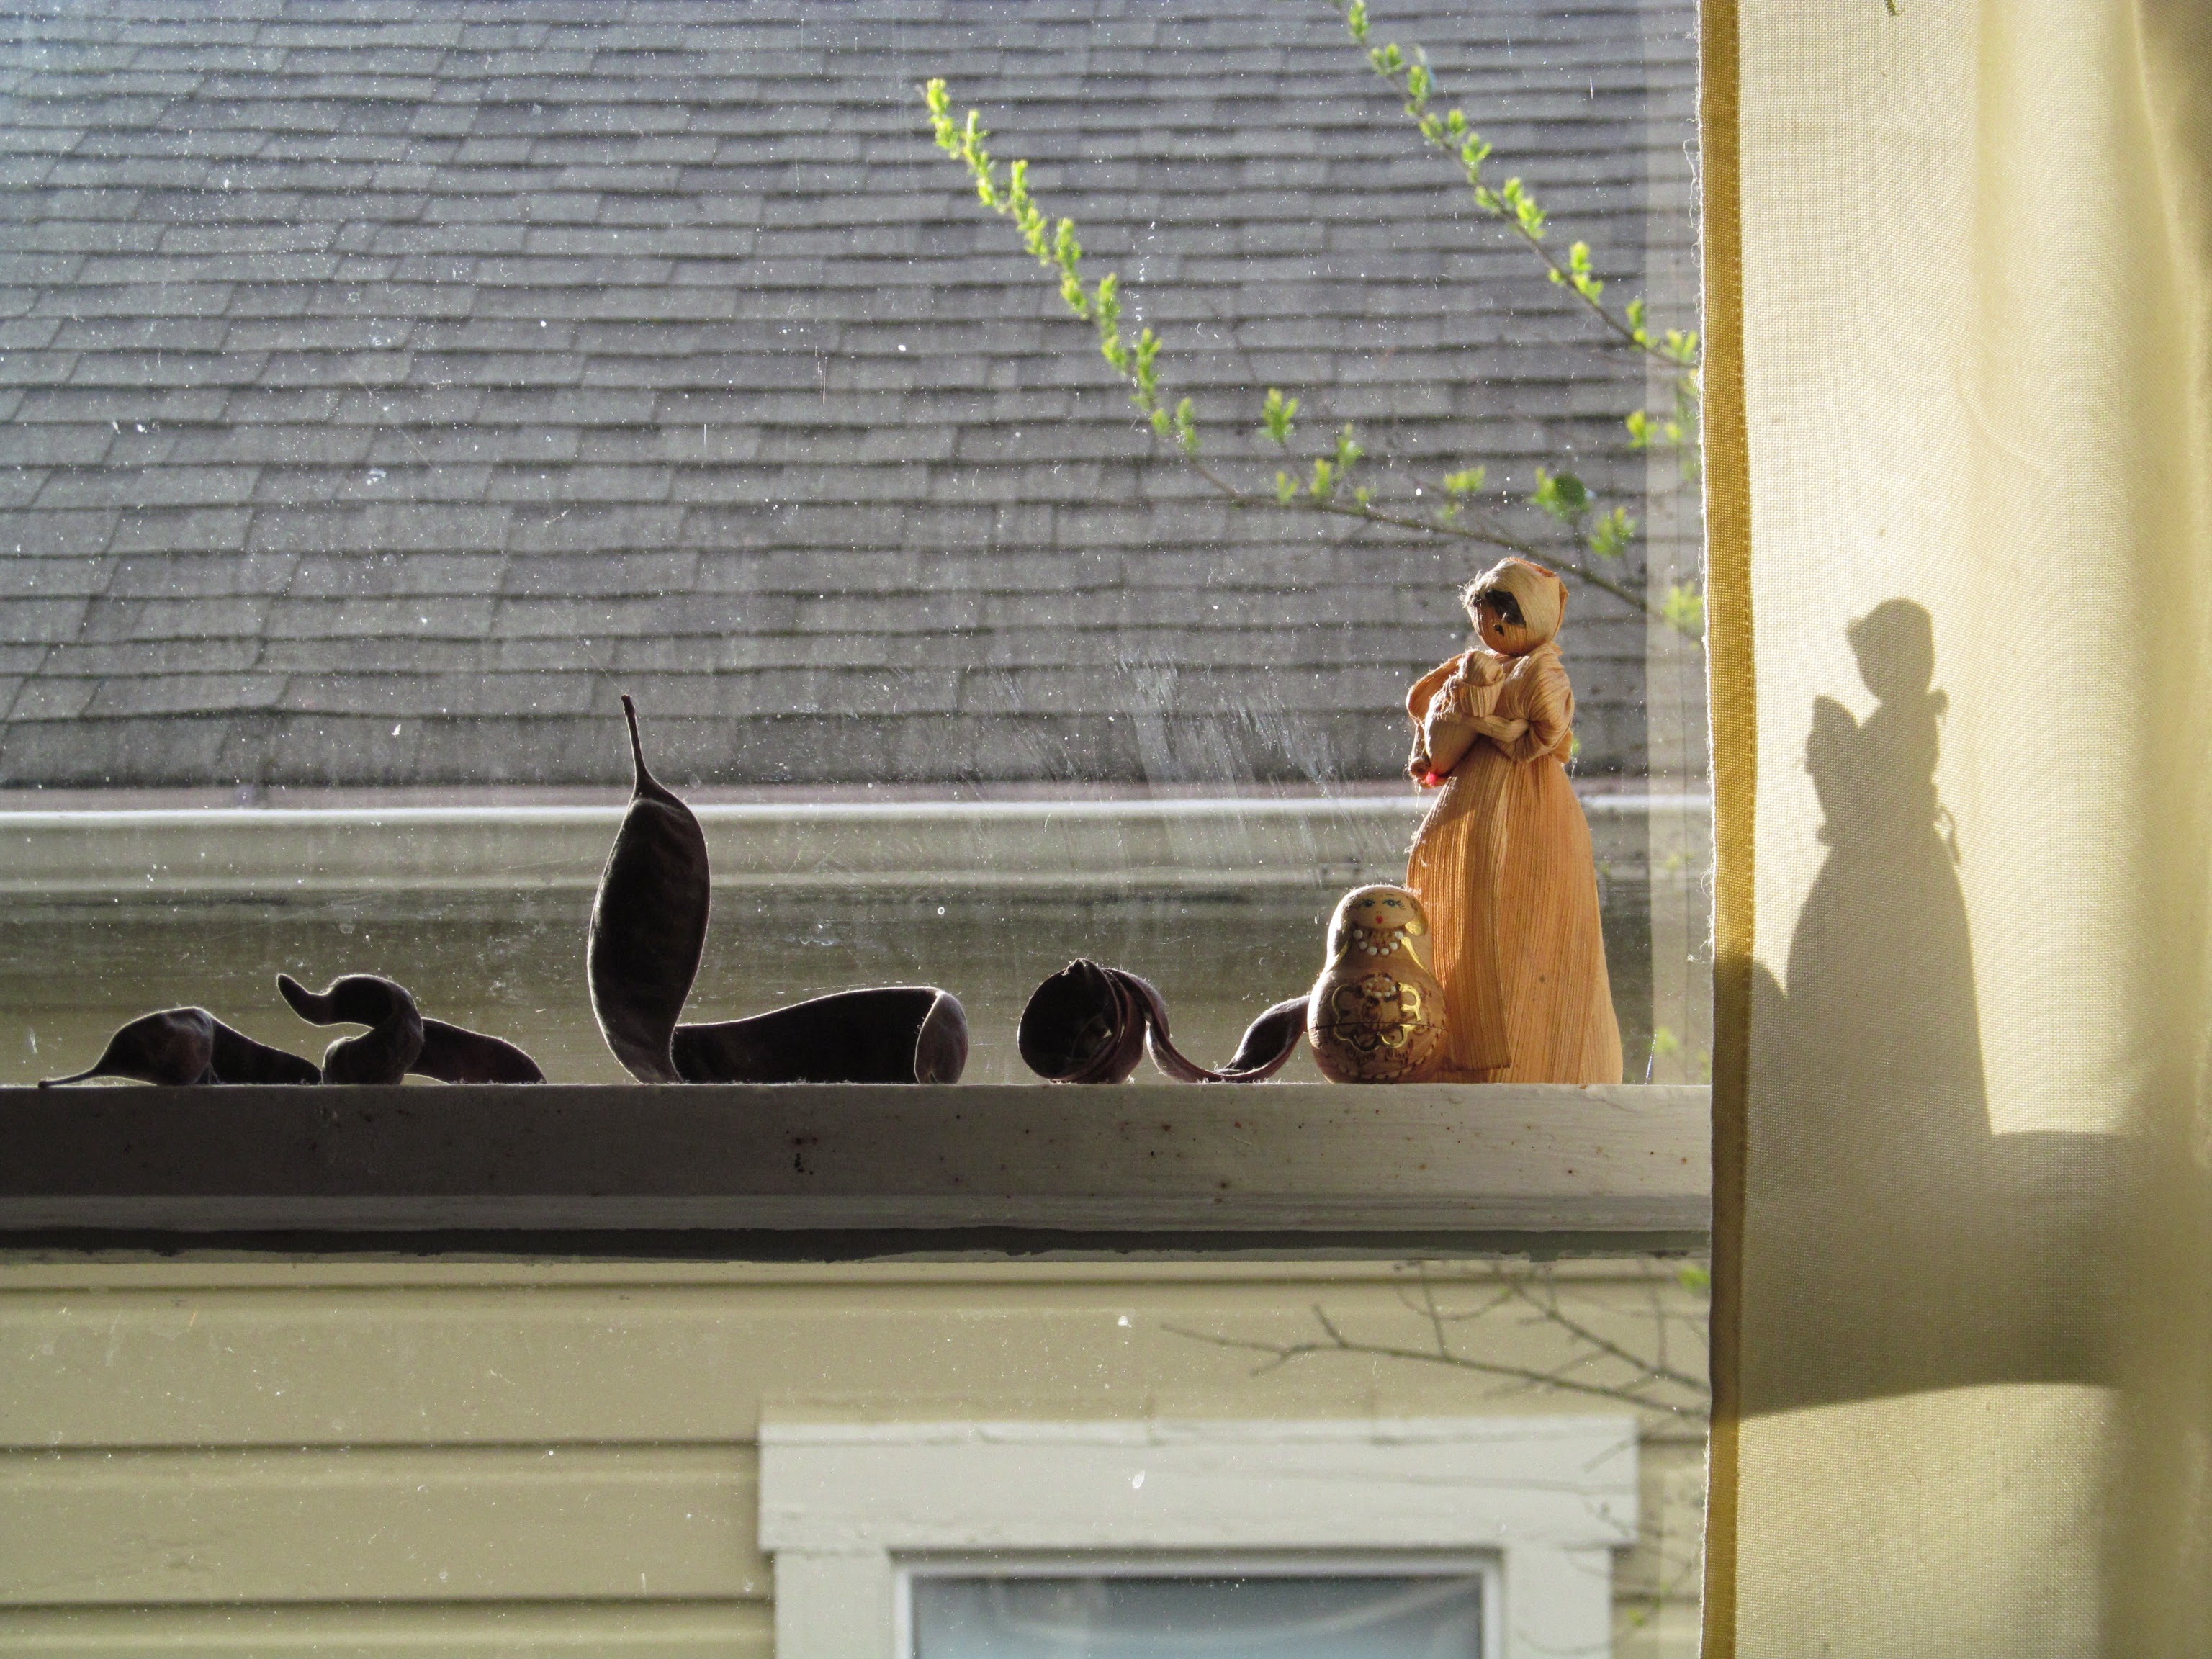 Cornhusk doll on a window sill with seed pods